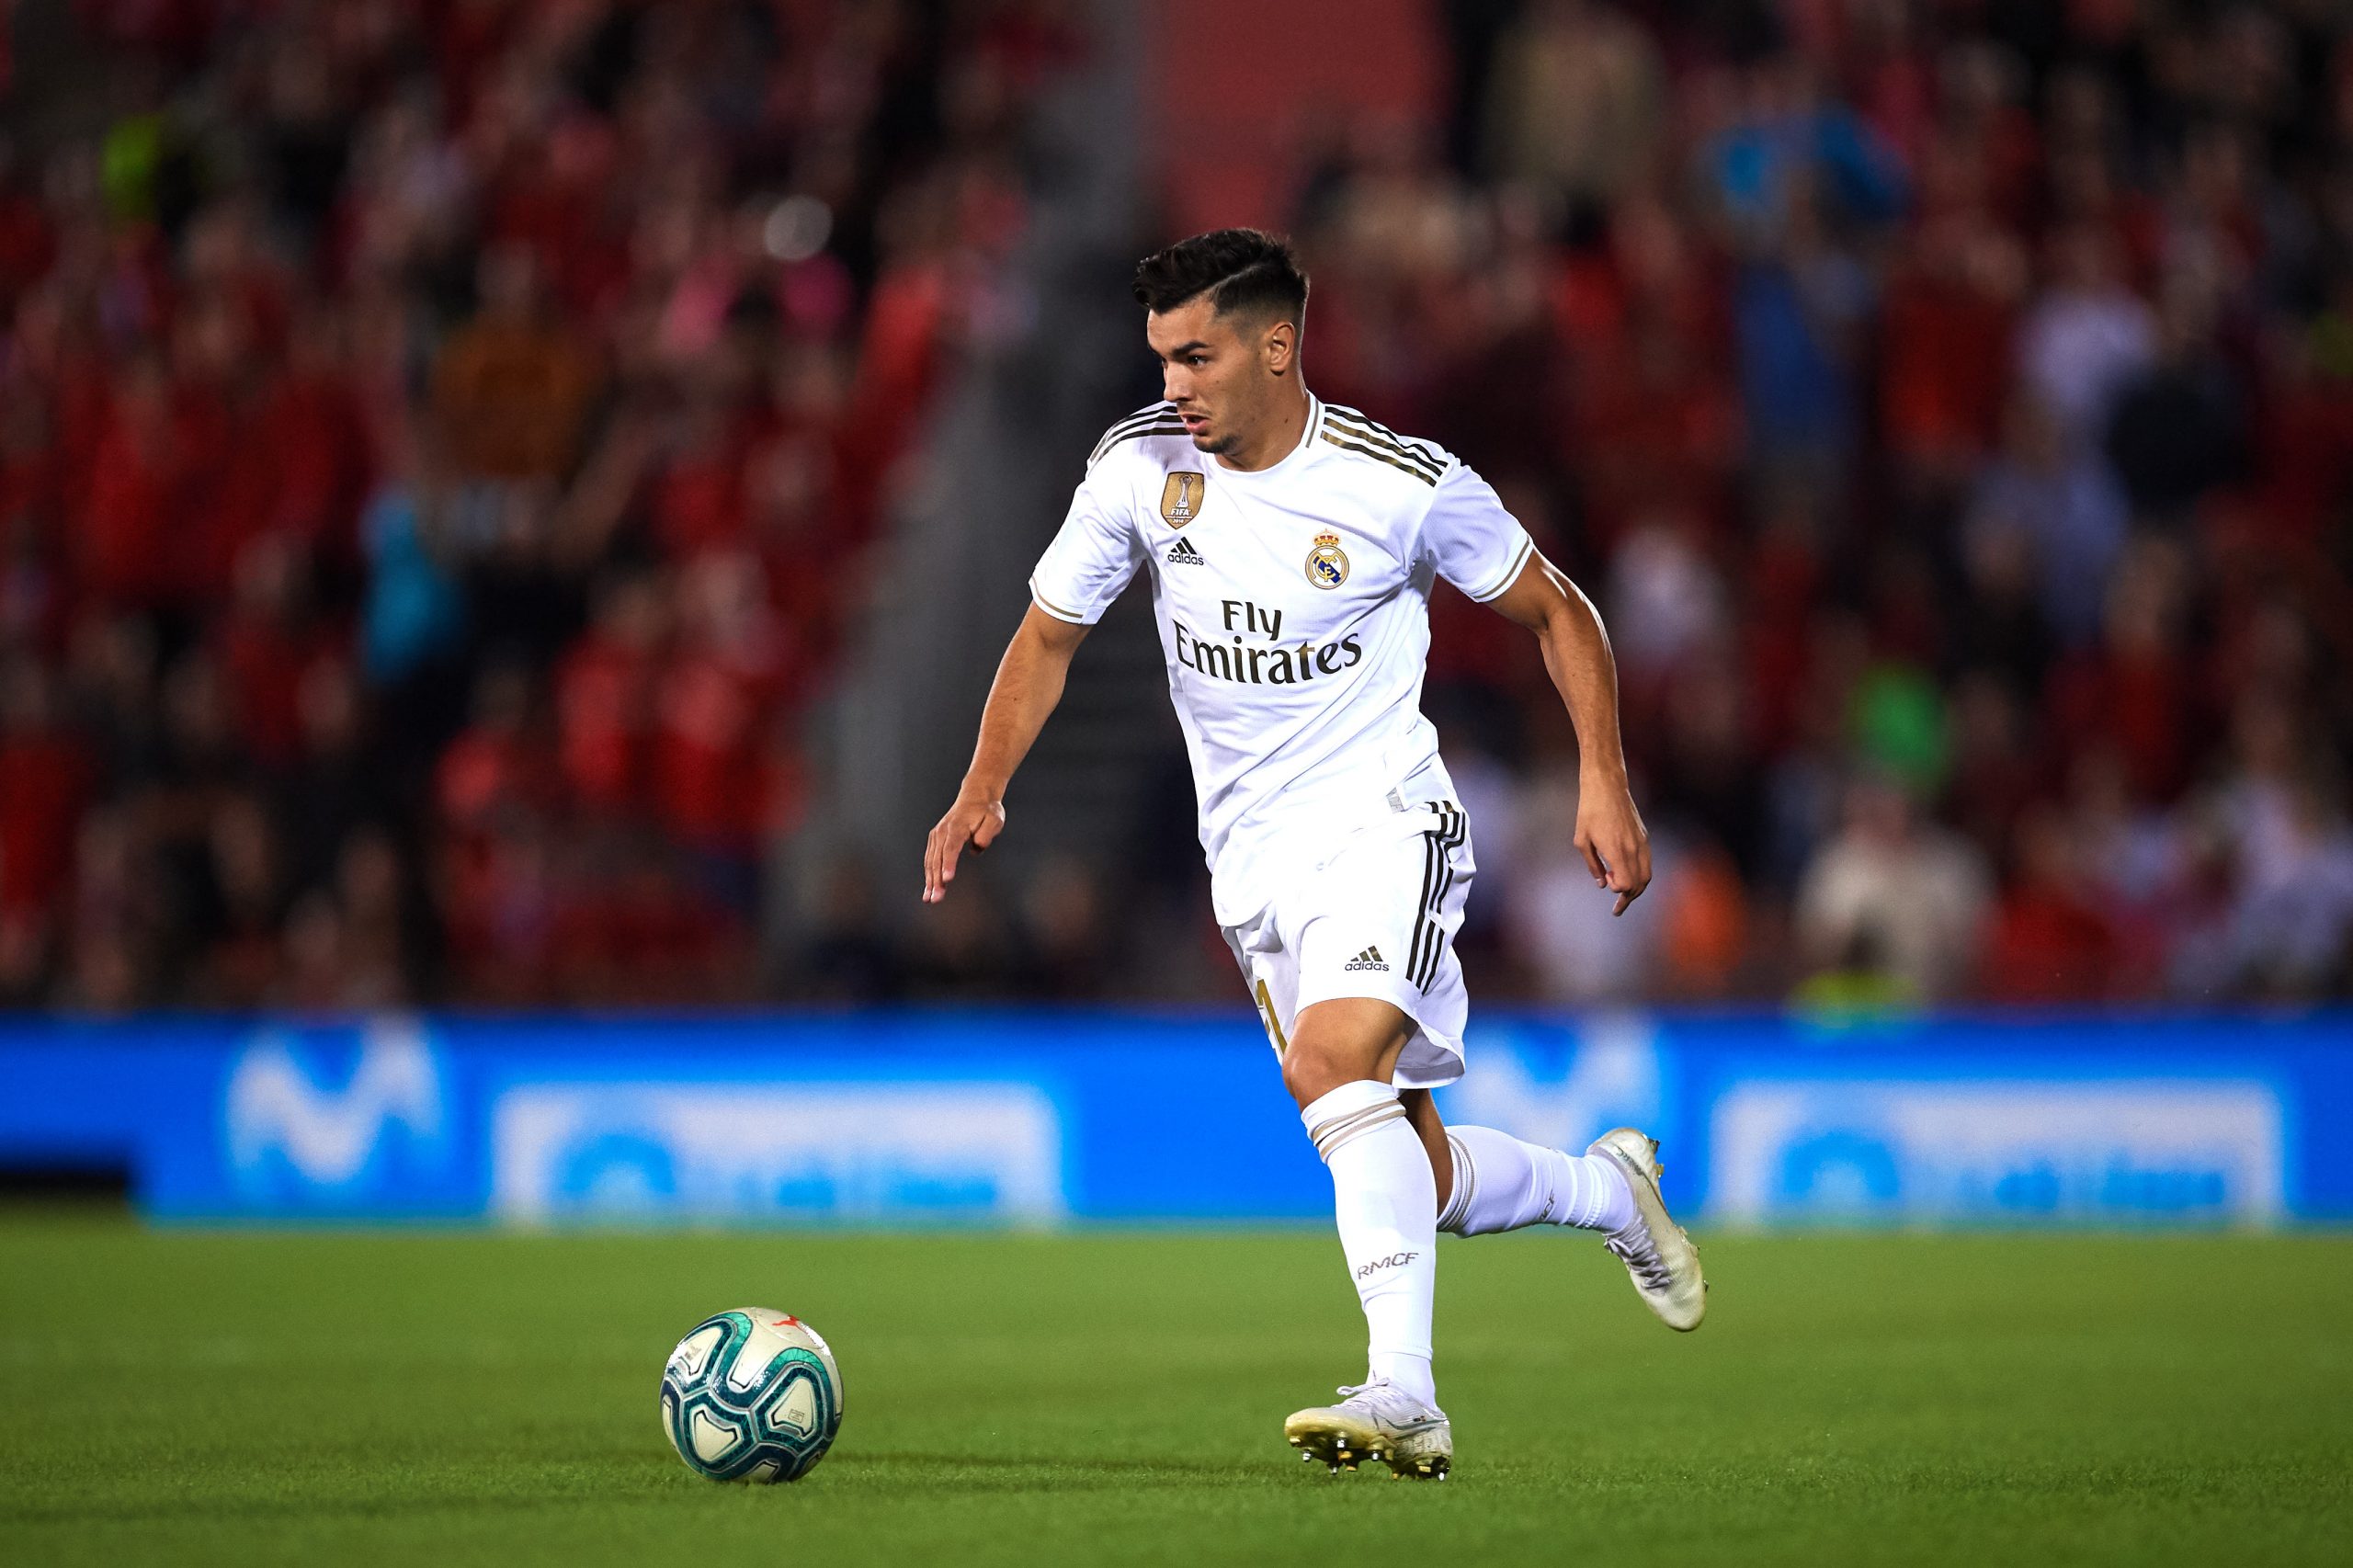 At 21, Brahim Diaz definitely needs more playing time - which he was struggling to find in Madrid, but will likely have a chance to get at Milan